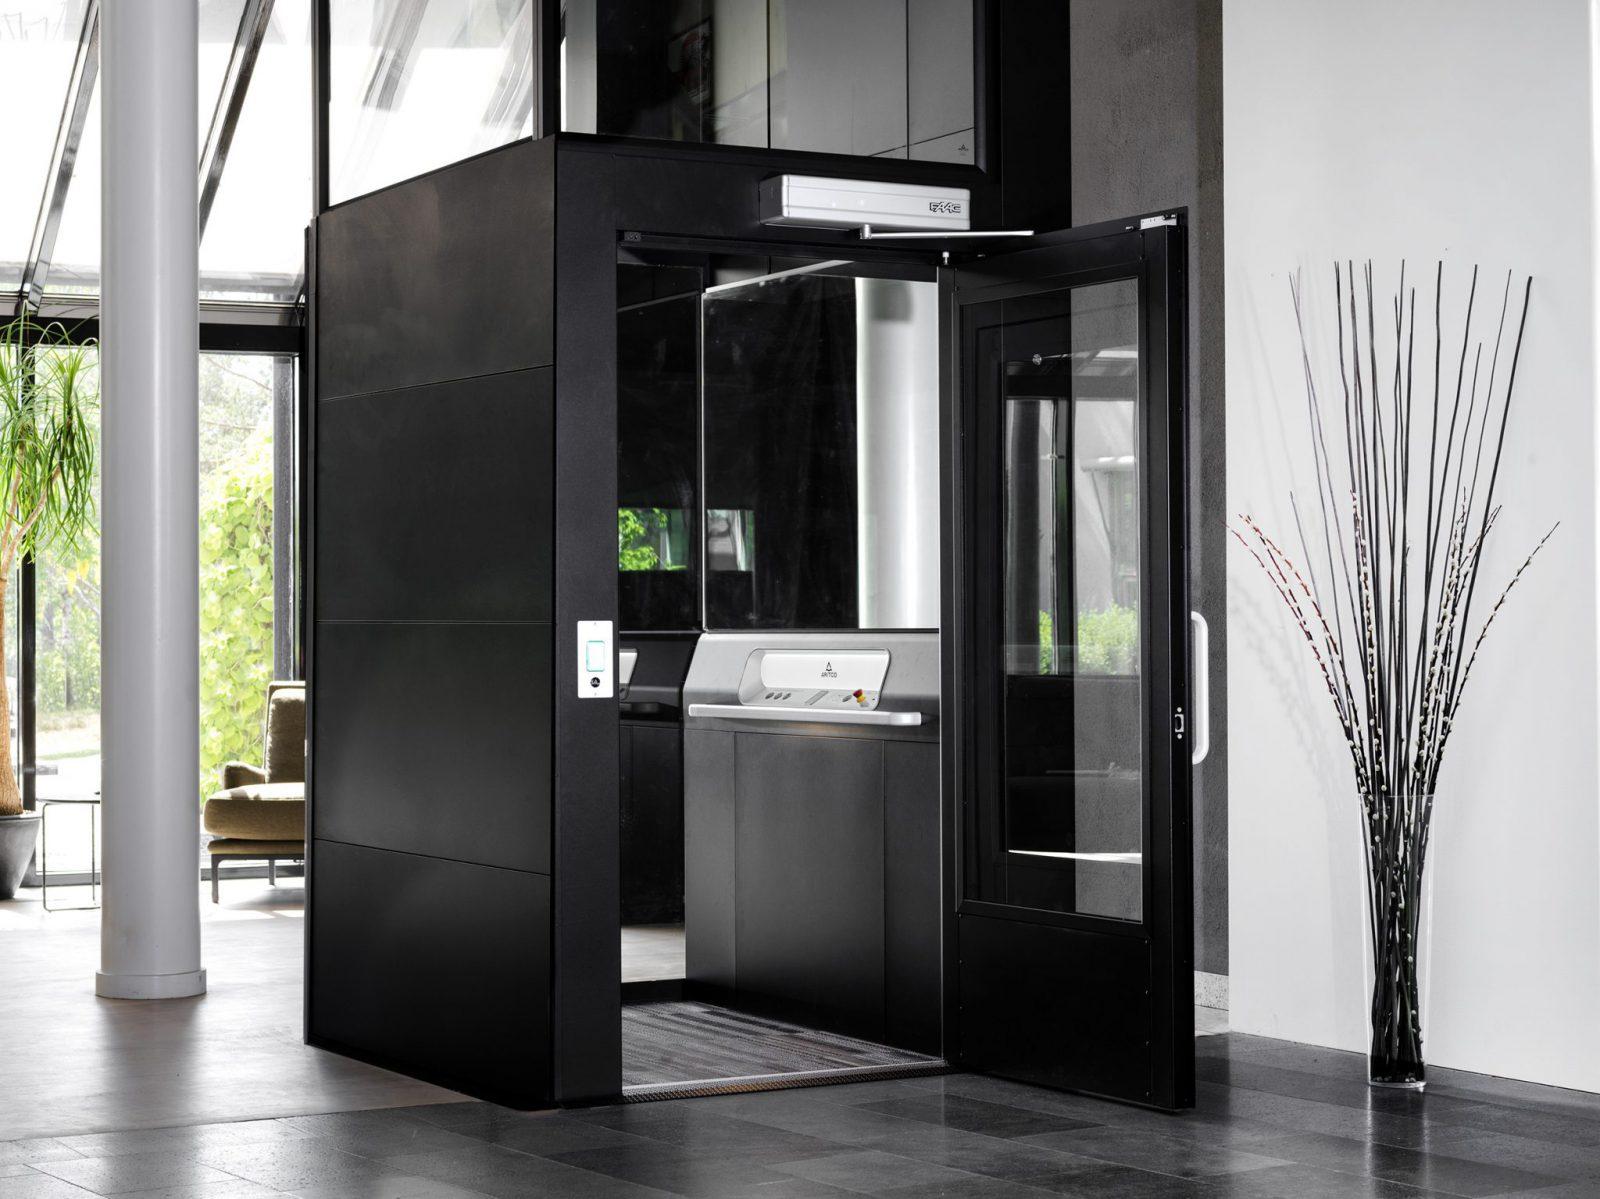 Lift/elevator for public and commercial use installed in a lobby. Model: Aritco PublicLift Access